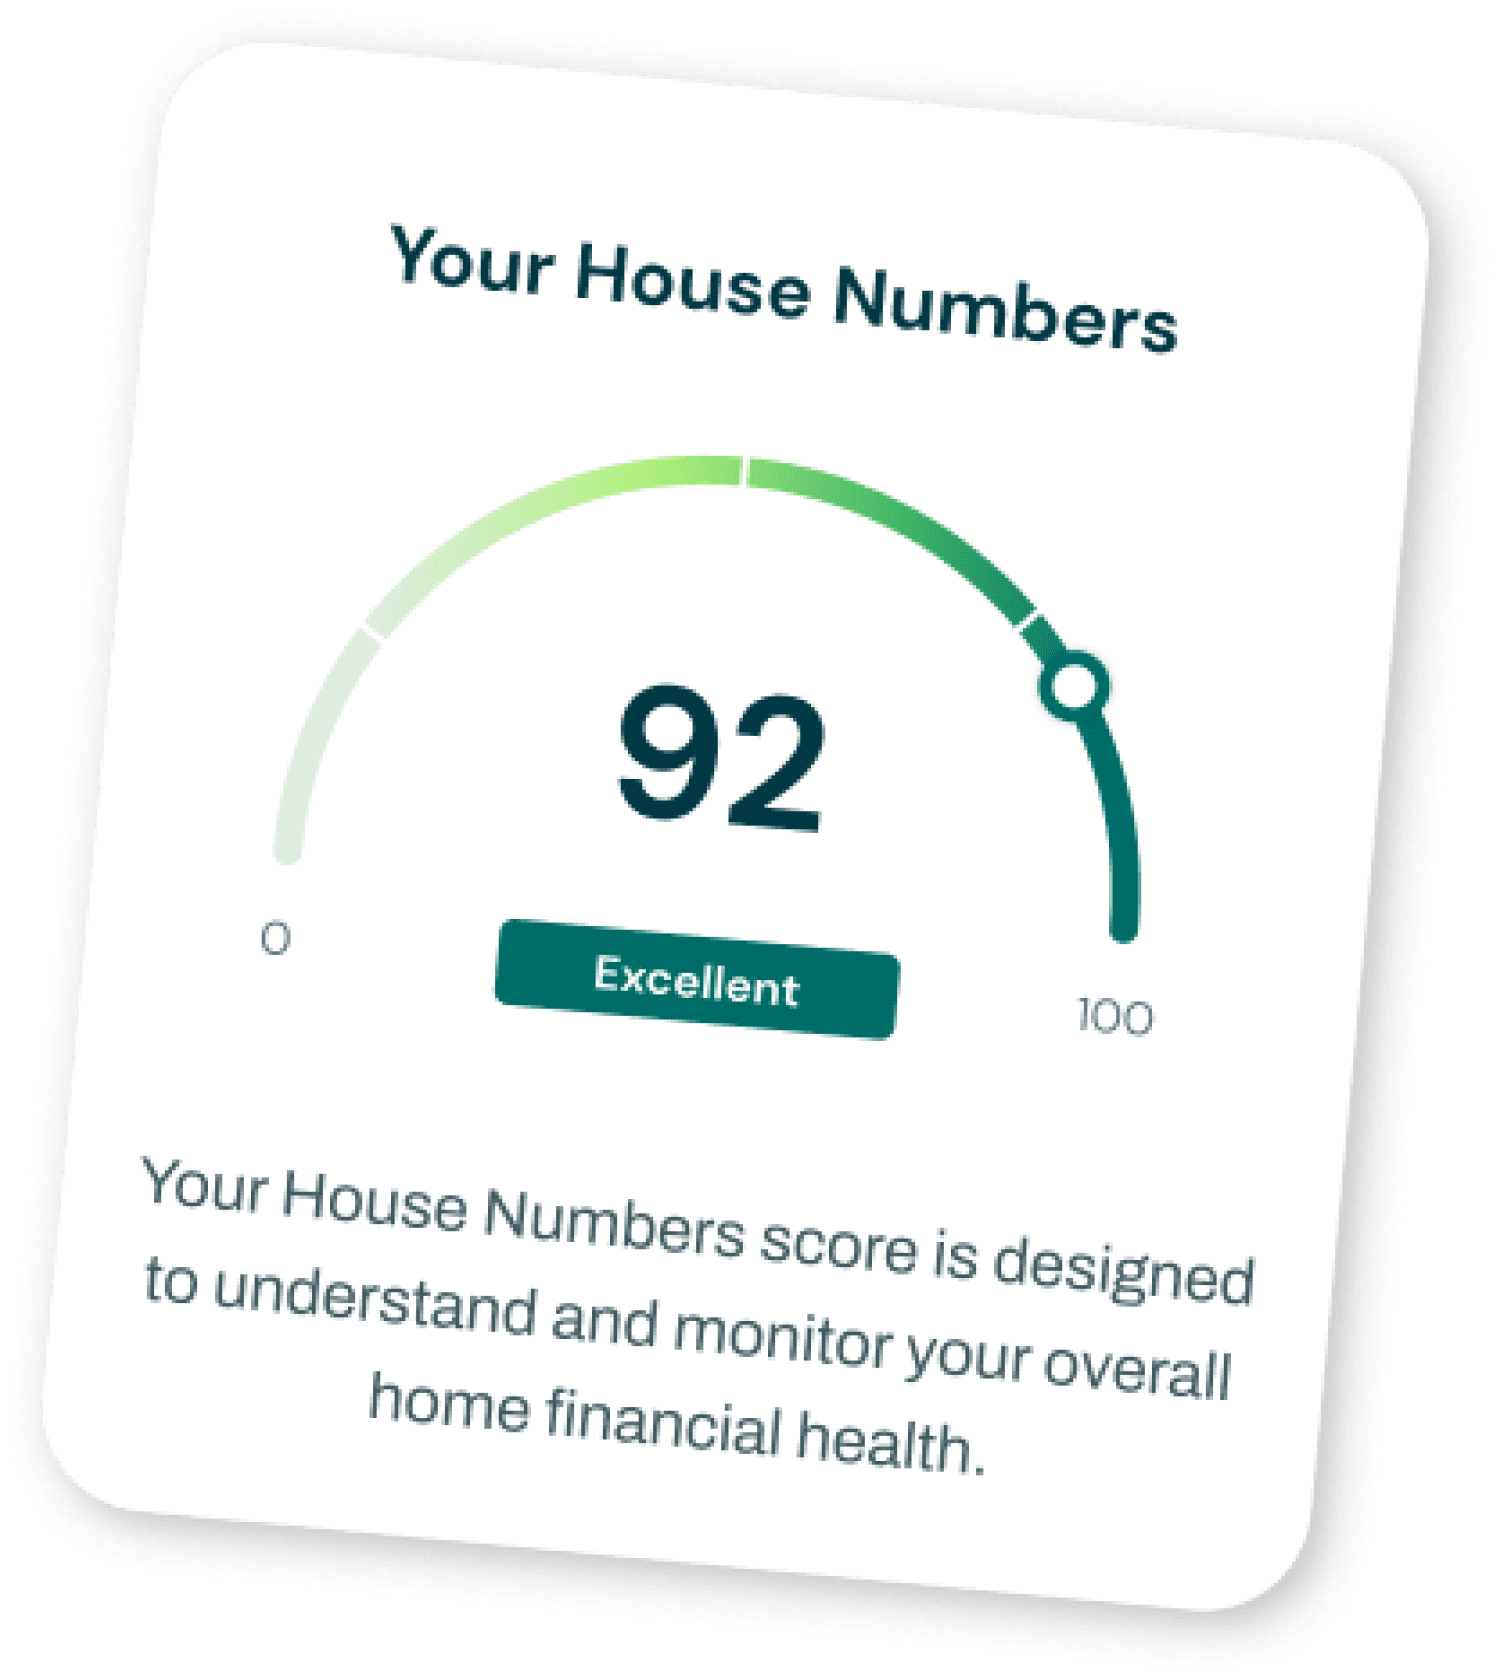 Screenshot of the Your House Numbers Score section